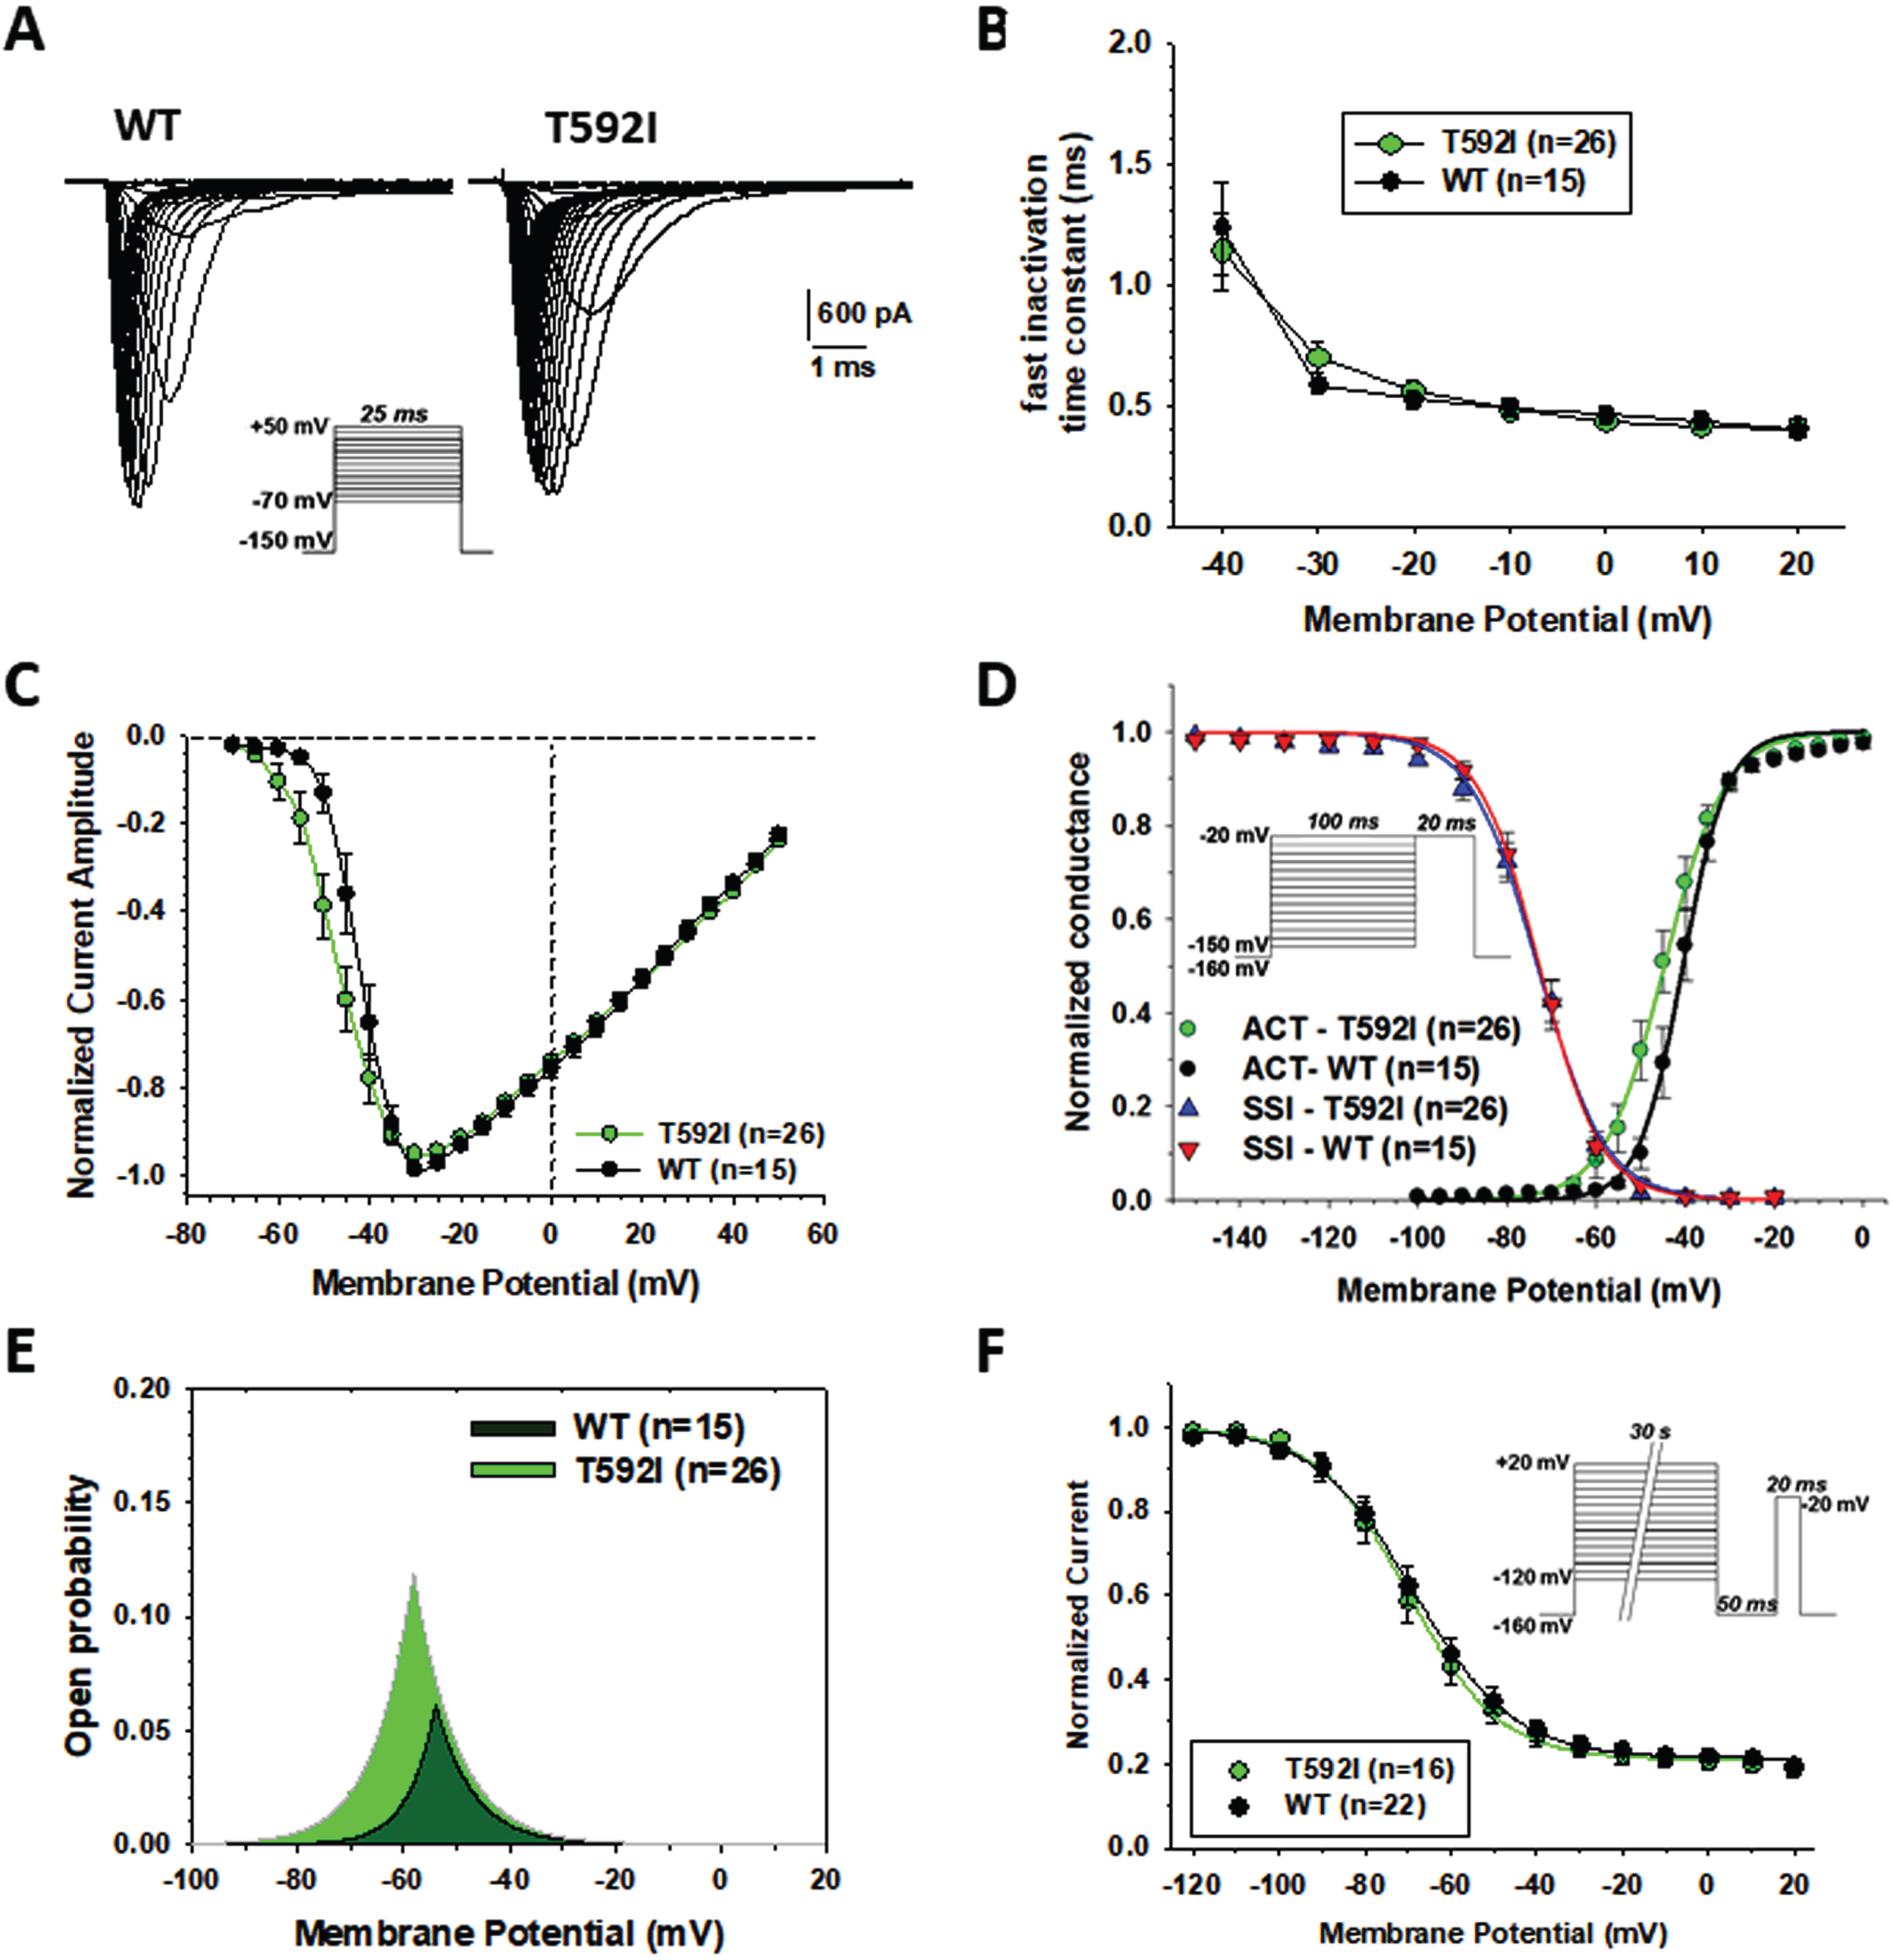 Functional characterization of WT and T592I Nav1.4 channel variants expressed in HEK283T cells. (A) Representative sodium current traces for T592I and WT. Sodium currents were elicited according the protocol shown inset. Interval between each pulse was 10 s. (B) Time constants for sodium channel entry in fast inactivation calculated from current decay monoexponential fit. (C) Normalized current-voltage (I-V) relationships were drawn from the sodium current traces recorded as shown in A. (D) Voltage dependence of activation and fast inactivation. For activation, the conductance was calculated from I-V relationships using the equation gNa = INa/(V –ENa), where gNa is the sodium conductance, INa is the peak sodium current, V is the membrane voltage, and ENa is the electrochemical gradient at equilibrium for sodium ions calculated from Nernst equation (ENa = +68.4 mV). The relationships (in green and black) were fitted to the Boltzmann equation gNa/gNa,max = 1/{1 + exp.((V-aV50)/Ka)}, where aV50 is the half-maximum activation voltage and Ka is the slope factor. Voltage dependence of fast inactivation was studied using a two-pulse voltage clamp protocol shown inset. The relationships (in blue and red), showing the normalized peak current amplitude recorded during the second pulse versus the first pulse membrane potential, were fitted to the Boltzmann equation INa/INa,max = 1 / {1 + exp.((V-fV50)/Kf)}, where fV50 is the half-maximum inactivation voltage, and Kf is the slope factor. (E) Window current resulting from the overlap of activation and fast inactivation relationships. (F) The voltage dependence of slow inactivation was studied using a three-pulse voltage clamp protocol. The normalized peak current amplitude during the third pulse was plotted versus the membrane potential of the first pulse. The relationships were fitted to the Boltzmann equation INa/INa,max = IR + (1 - IR)/{1 + exp.((V-sV50)/Ks)}, where sV50 is the half-maximum inactivation voltage, Ks is the slope factor, and IR is the steady fraction of non-inactivating channels. Data points in the relationships are mean±SEM from n cells. The fit parameter values are given in Table 2.